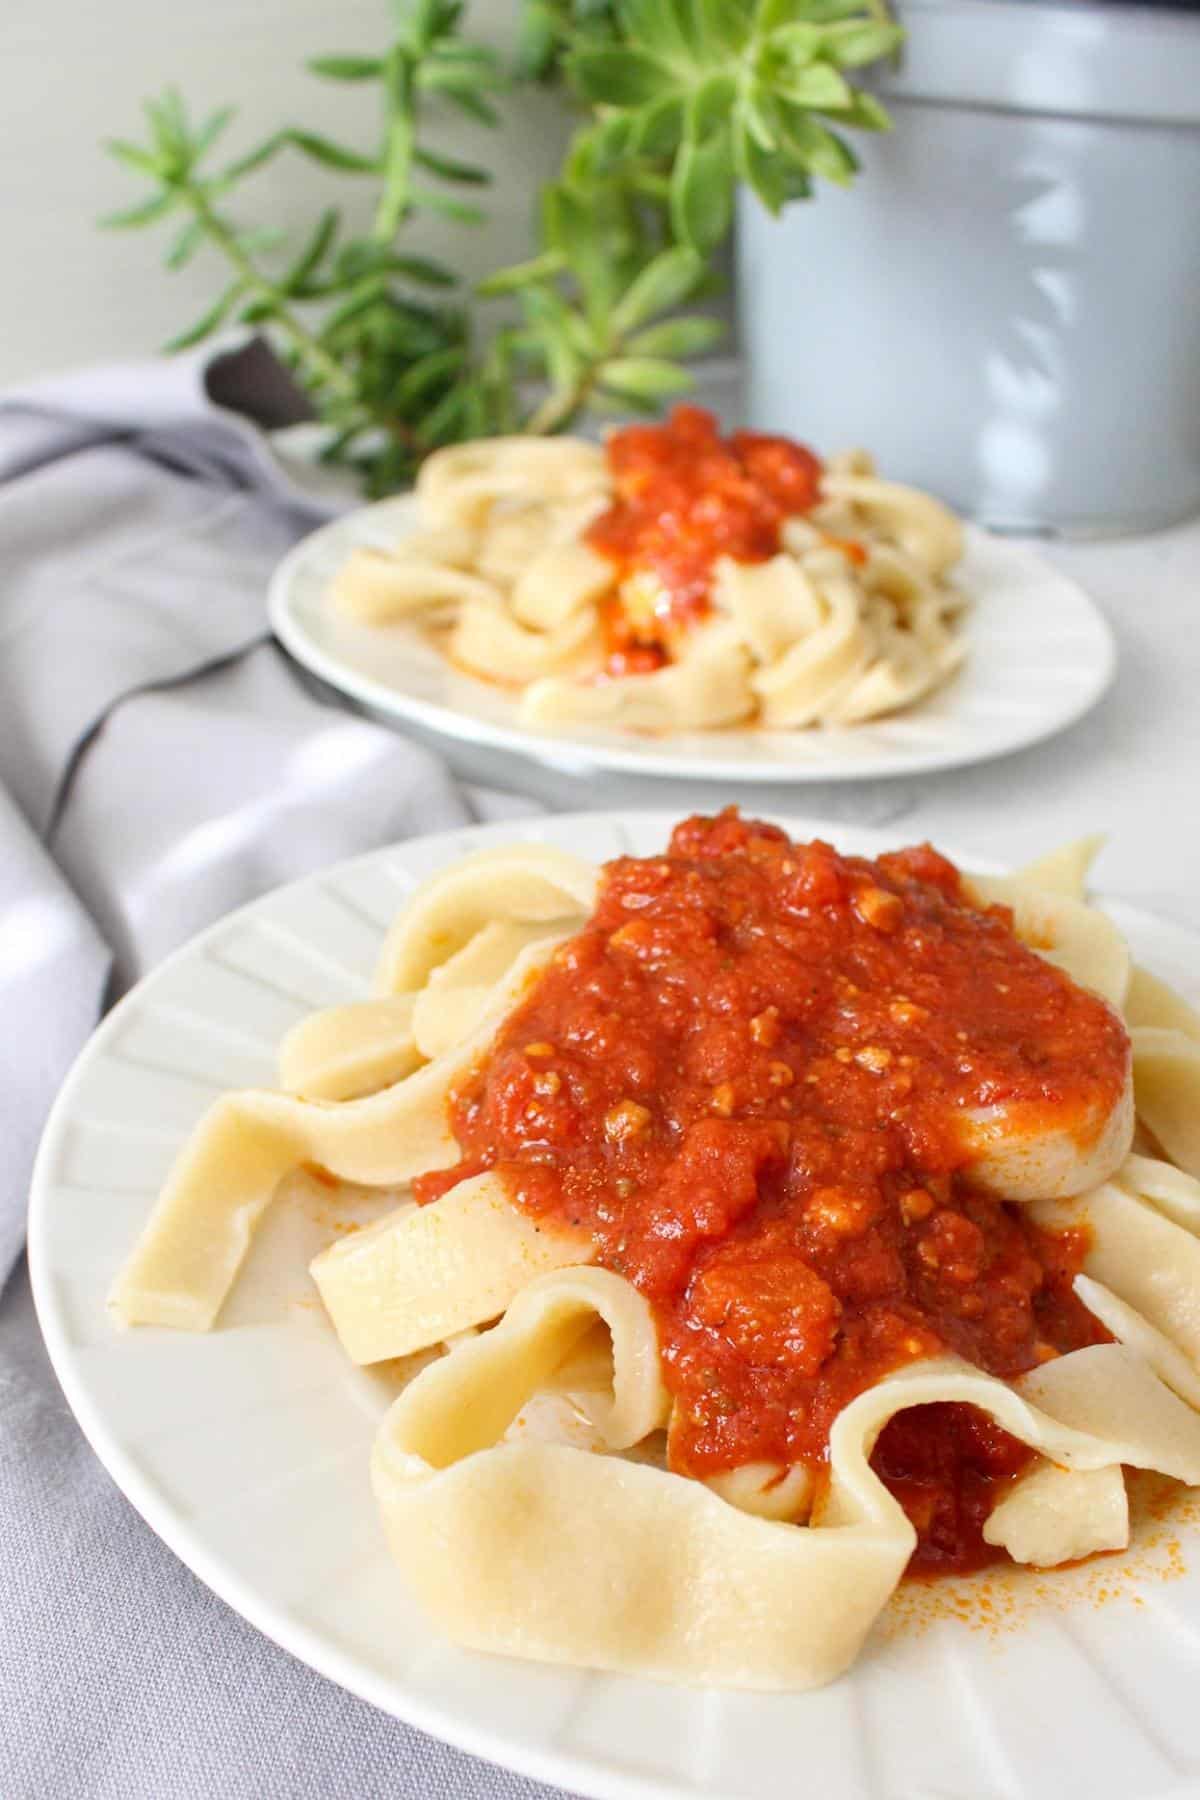 homemade vegan pasta noodles on plates with red sauce